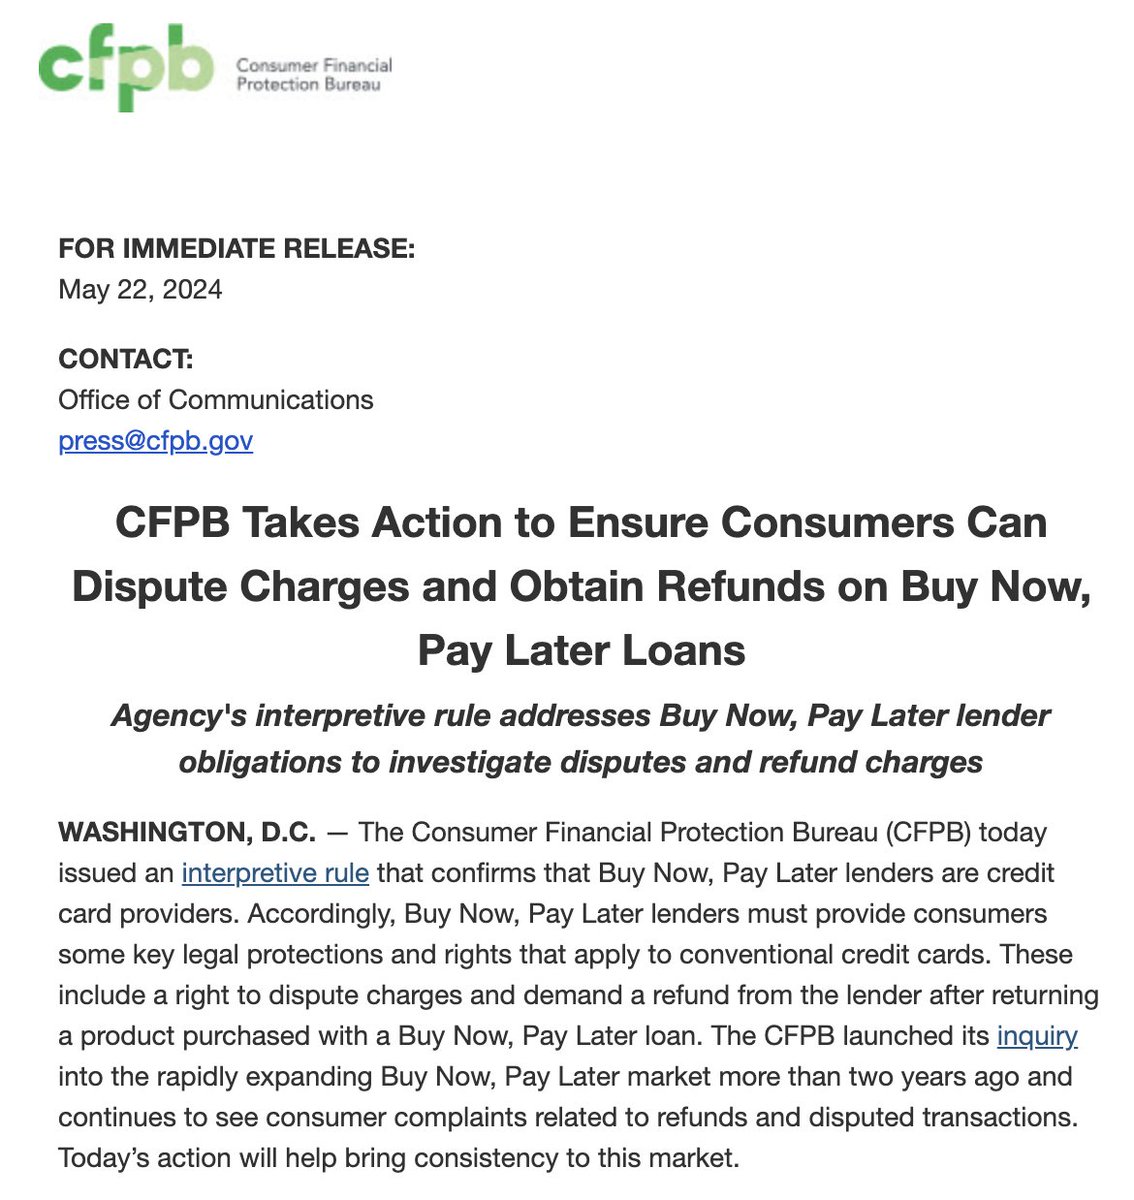 CFPB releases interpretative guidance 'that confirms that Buy Now, Pay Later lenders are credit card providers'

Guidance will require BNPL firms that offer pay-in-4, like @Klarna @Affirm @AfterpayUSA, to investigate disputes, provide refunds & provide statements & disclosures.